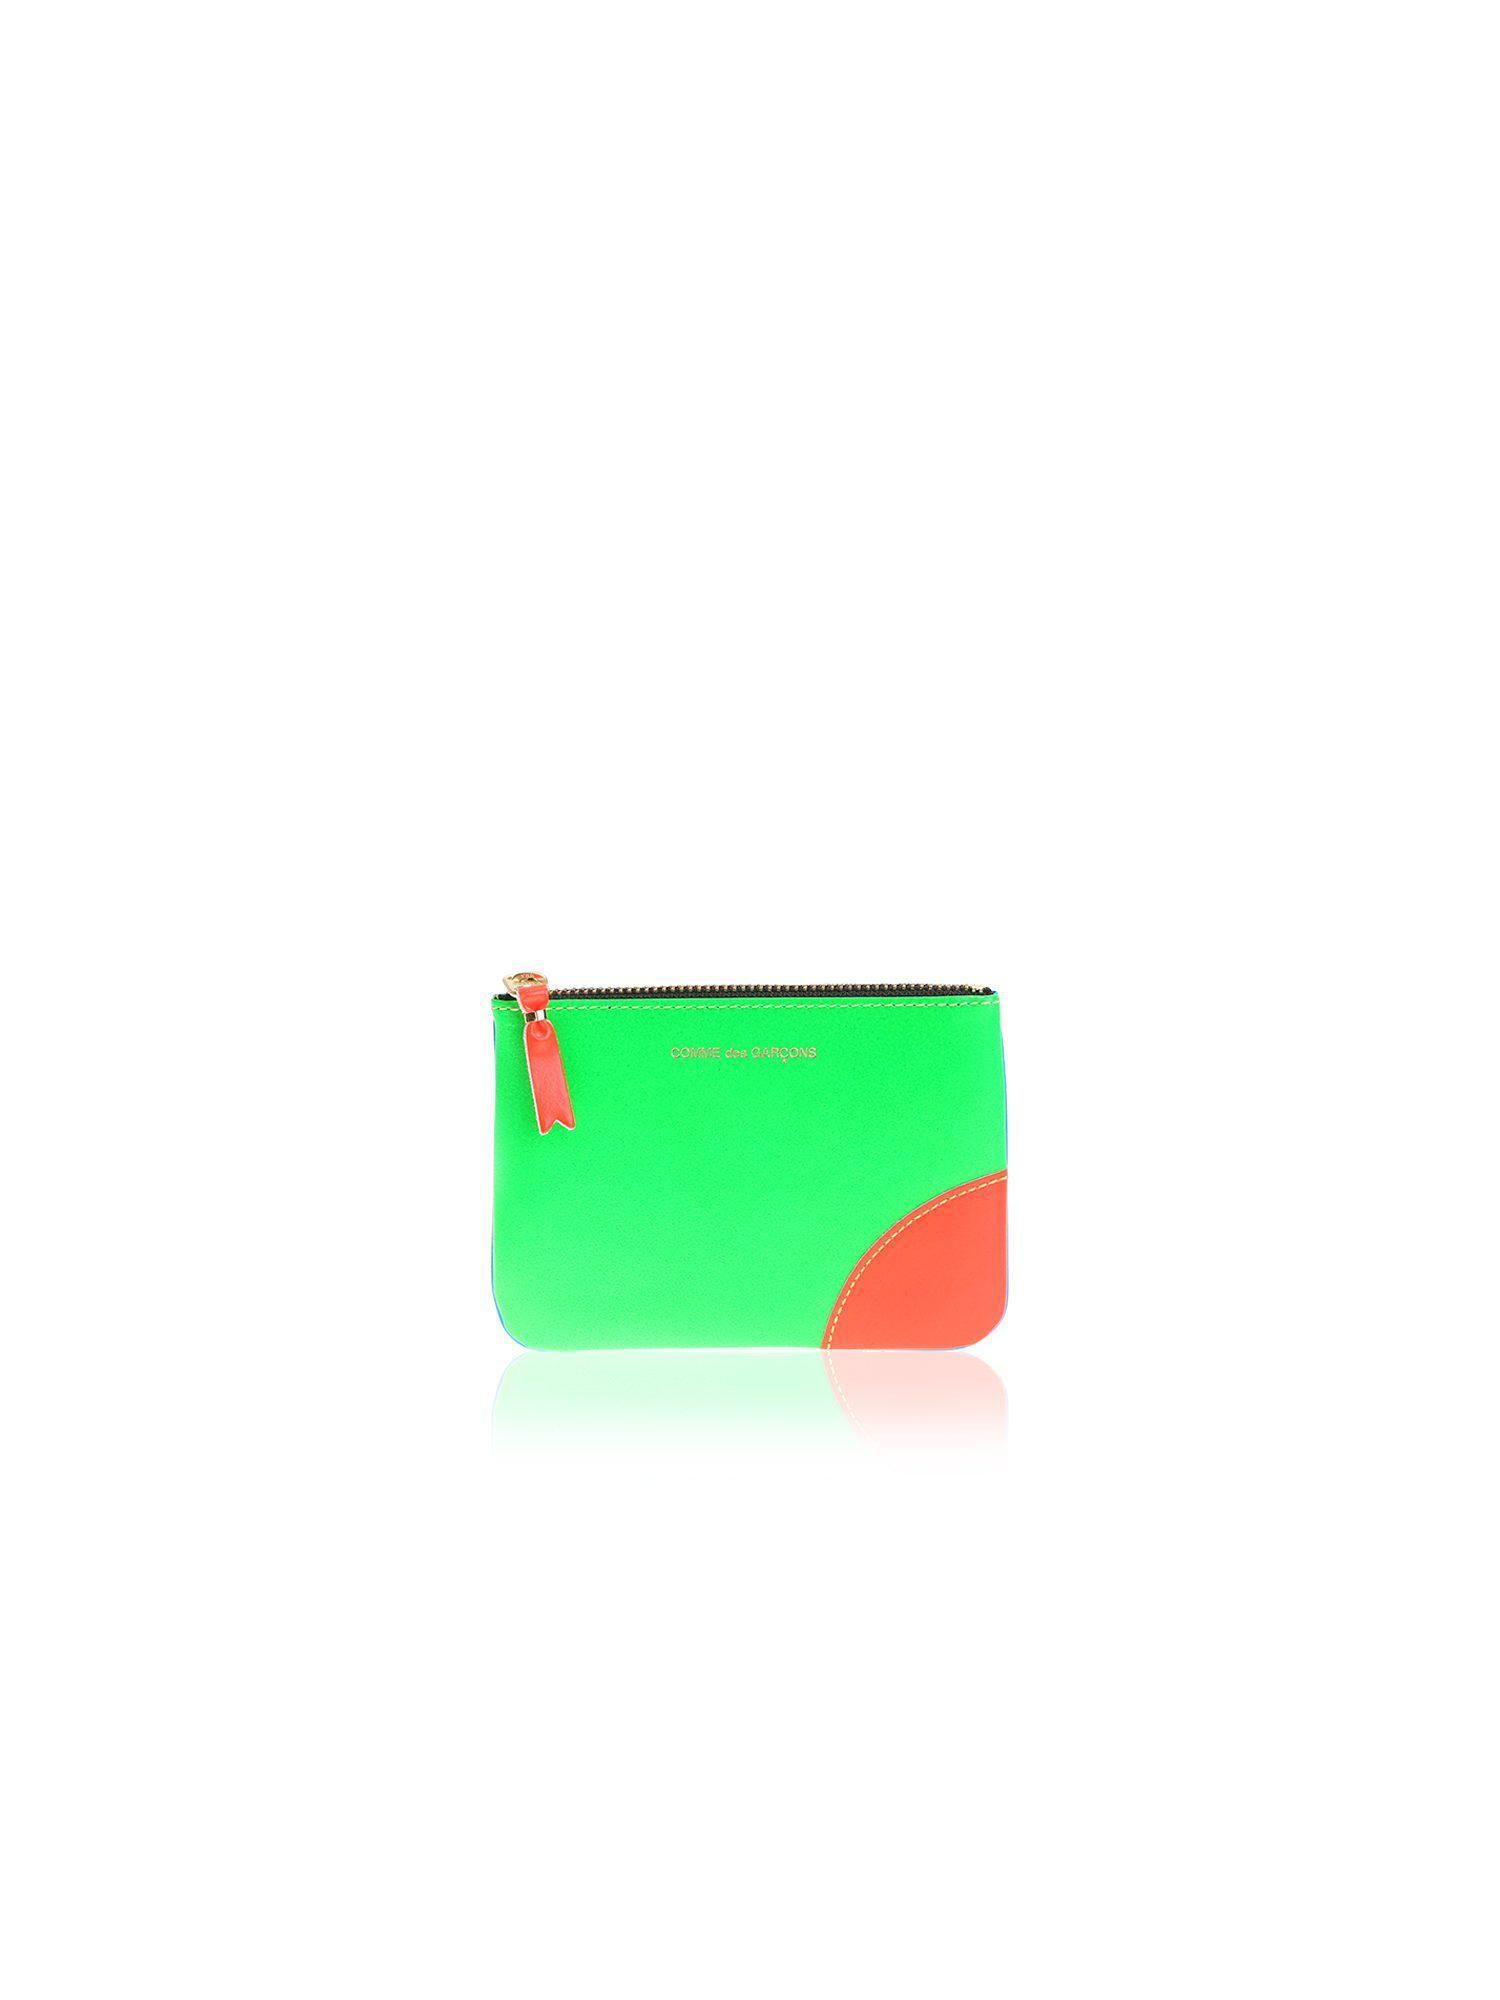 Light Blue Lime Green Logo - Comme Des Garçons Green And Neon Light Blue Leather Clutch in Green ...